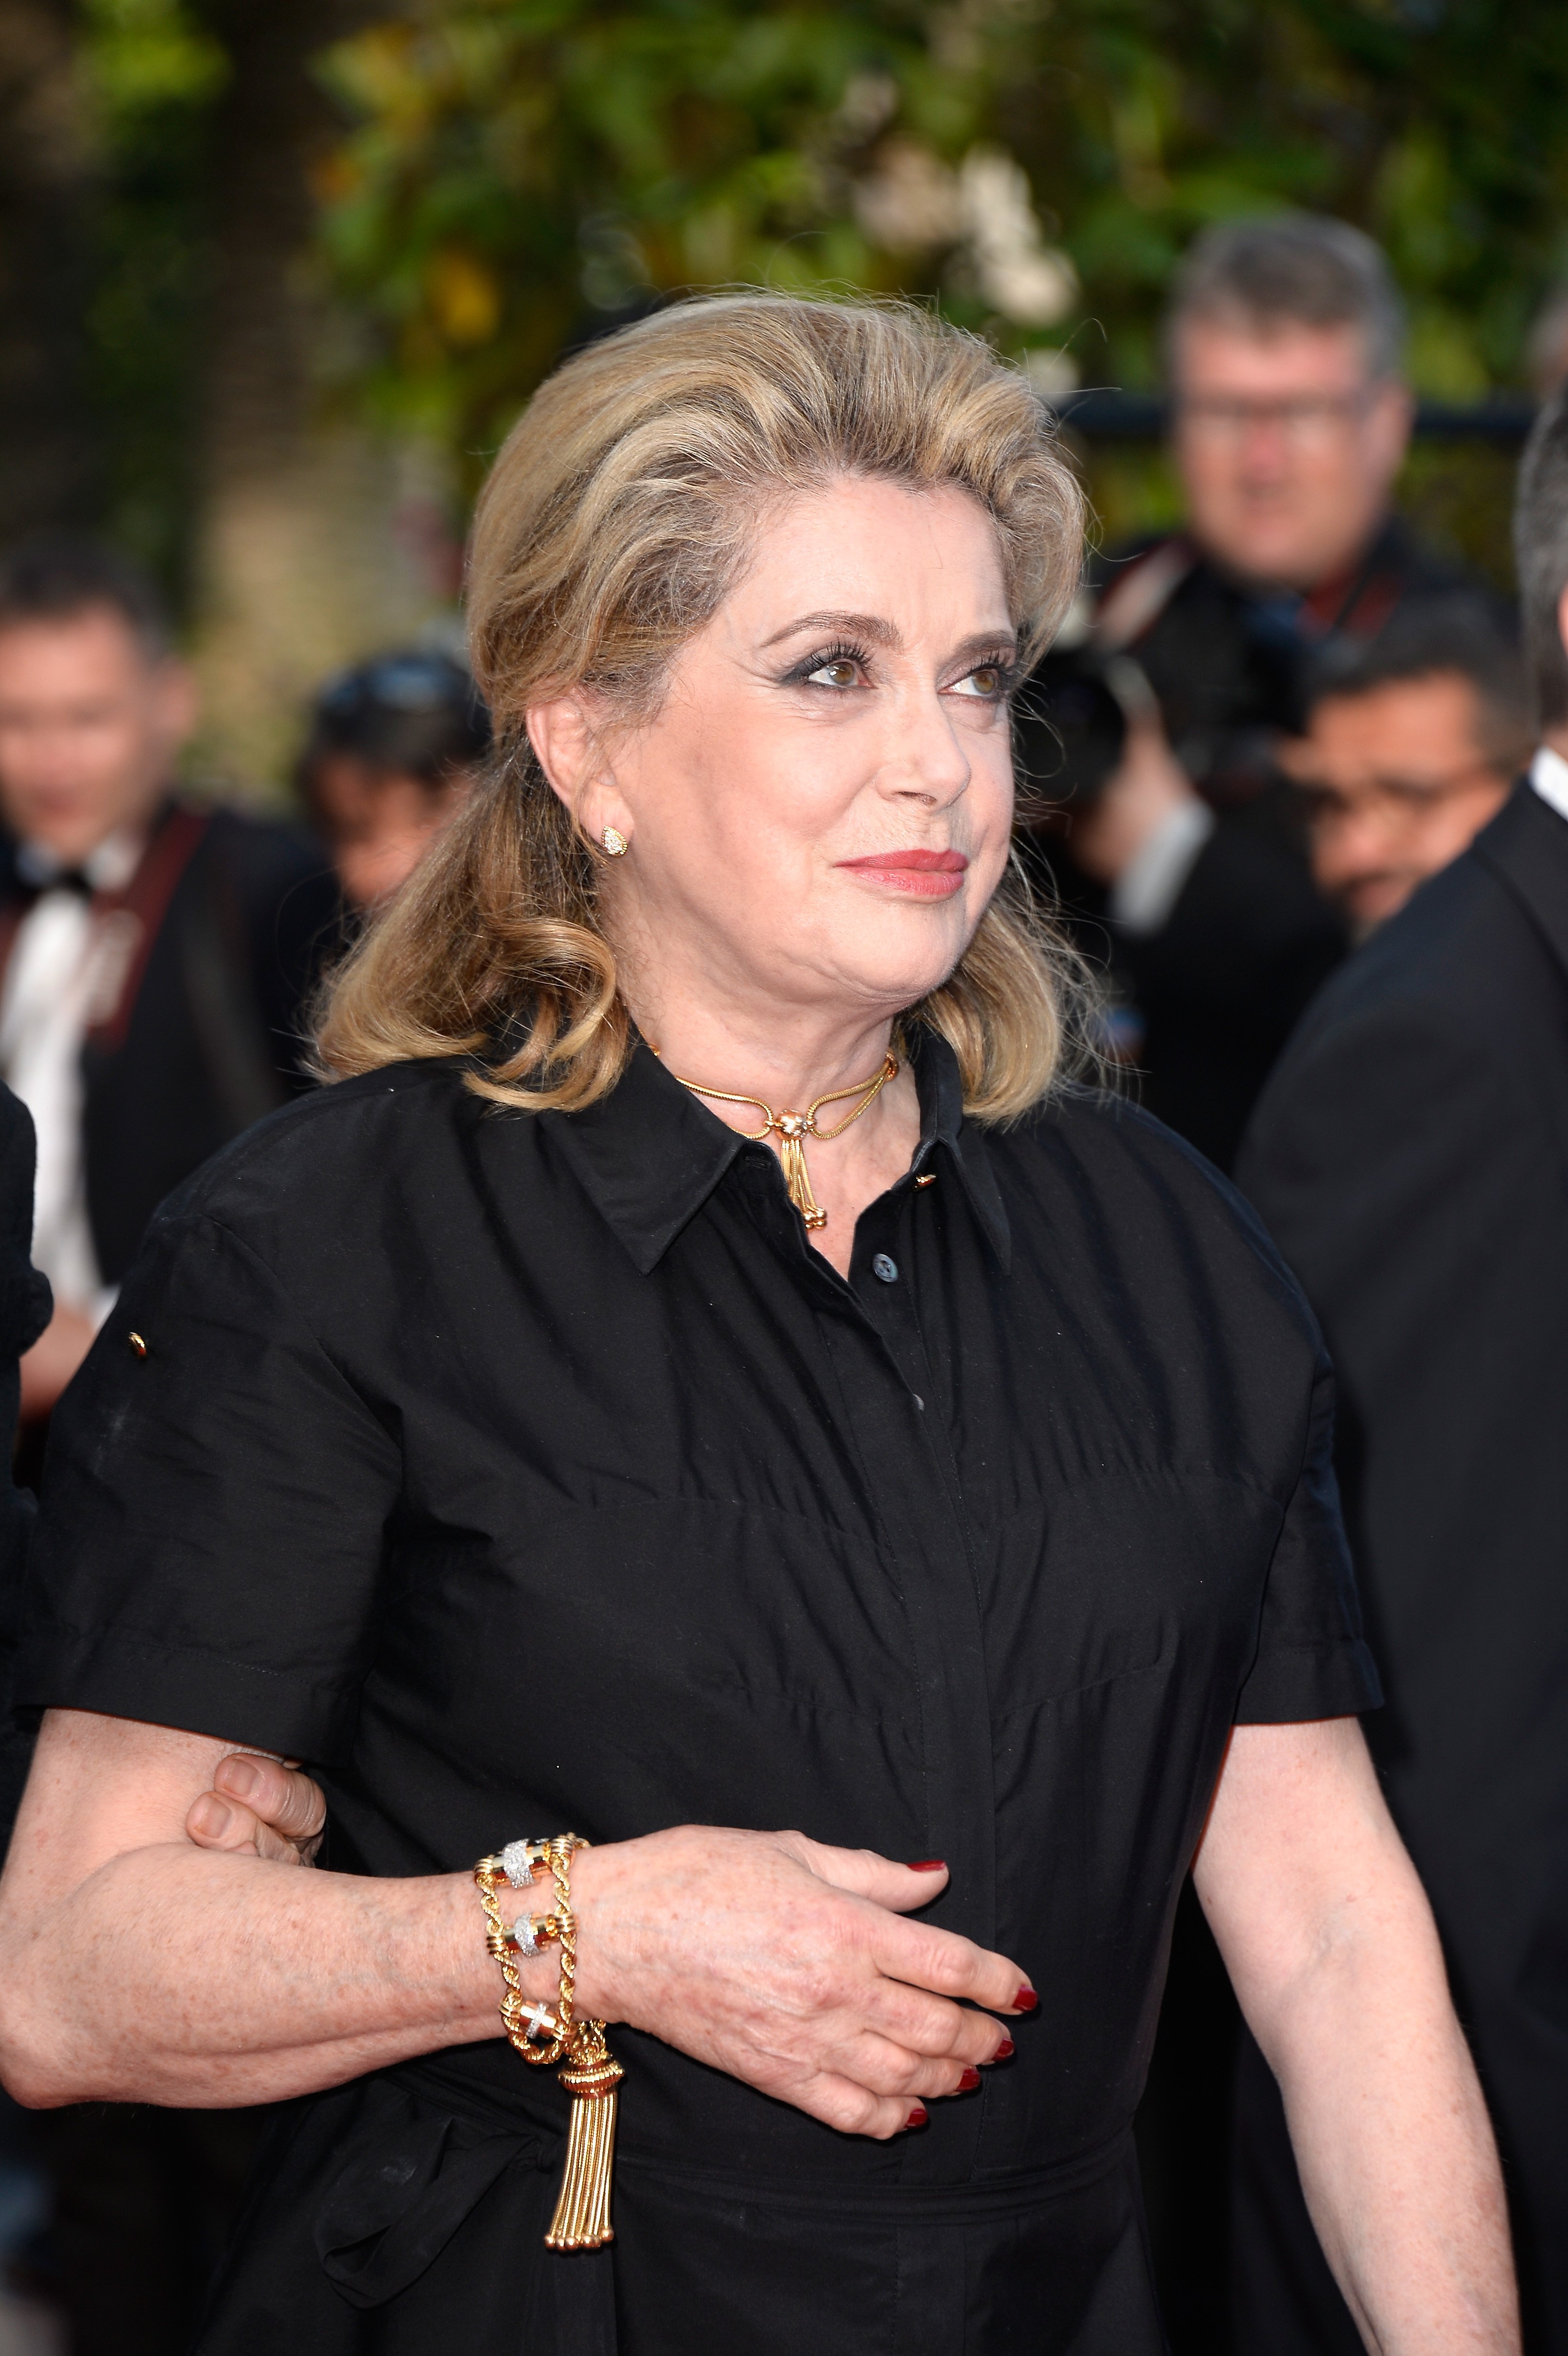 Catherine Deneuve in Cannes, France in 2014. | Source: Getty Images